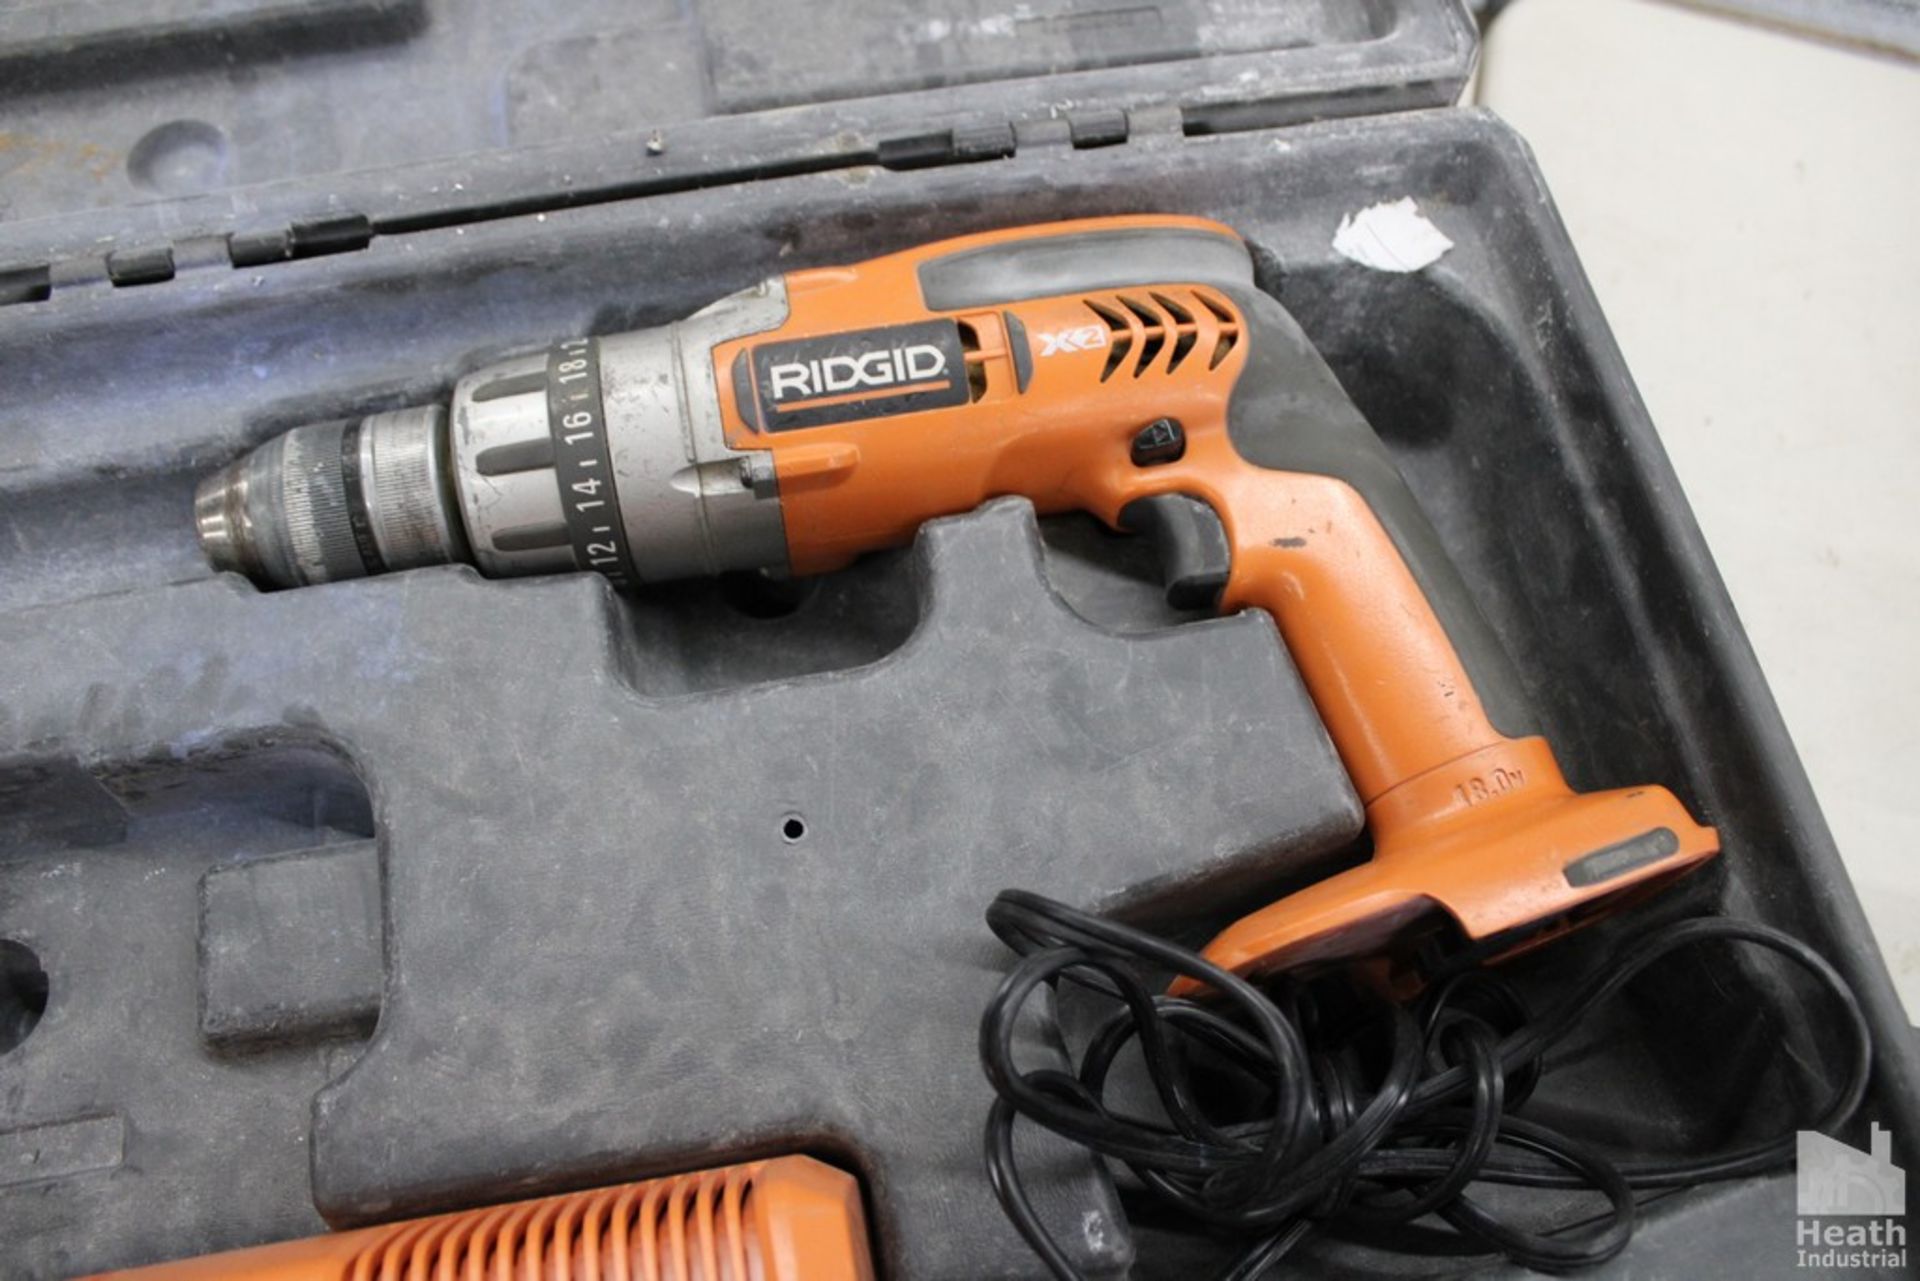 RIDGID MODEL R841151 1/2" CORDLESS DRILL/DRIVER WITH BATTERY, CHARGER AND CASE - Image 2 of 4